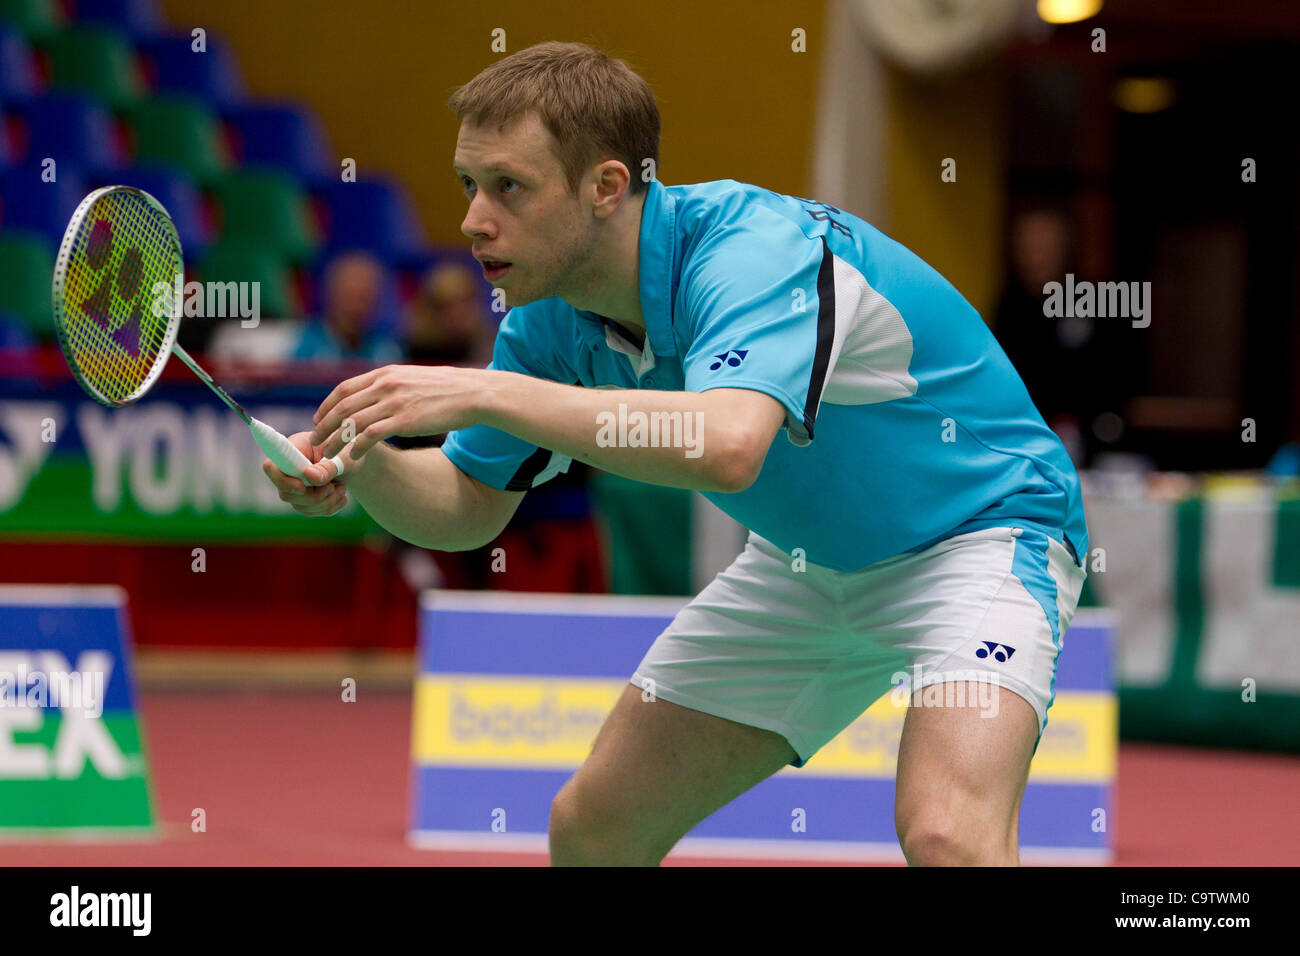 AMSTERDAM, THE NETHERLANDS; 19/02/2012. Badminton player Vitalij Durkin (pictured) and his partner  Alexandr Nikolaenko from Russia lose their match against the English in the bronze medal match of the European Team Championships Badminton 2012 in Amsterdam. Stock Photo